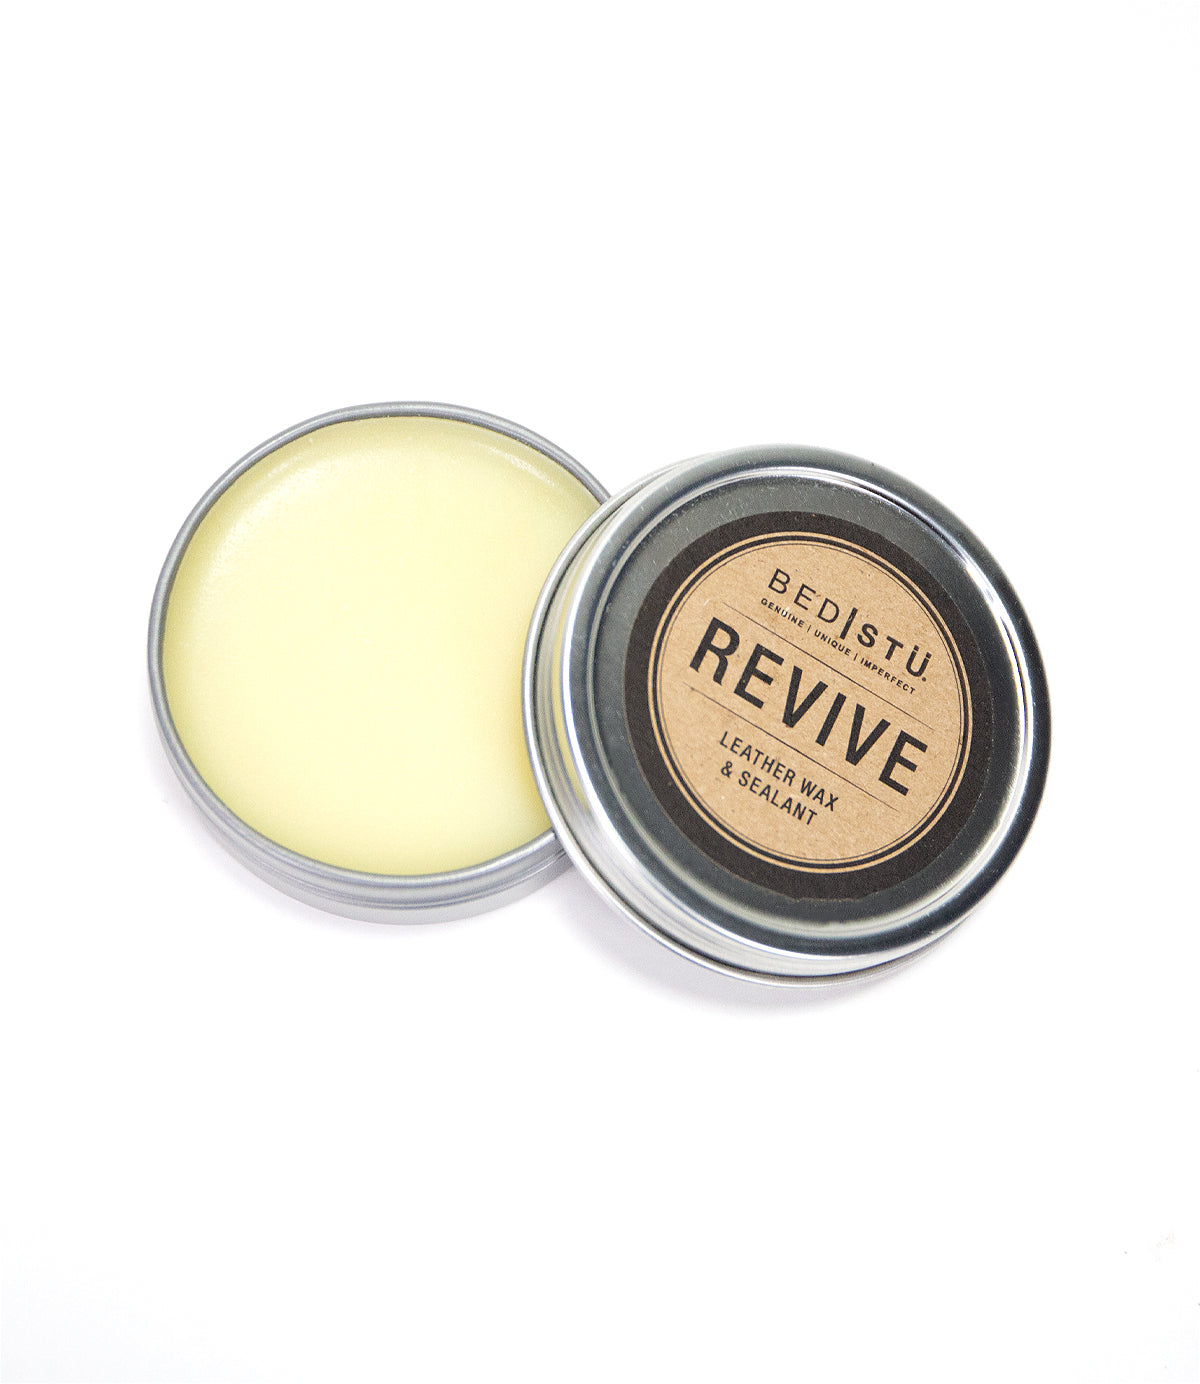 An open tin of Bed Stu revive leather wax and sealant, a protective barrier for leather products, on a white background.